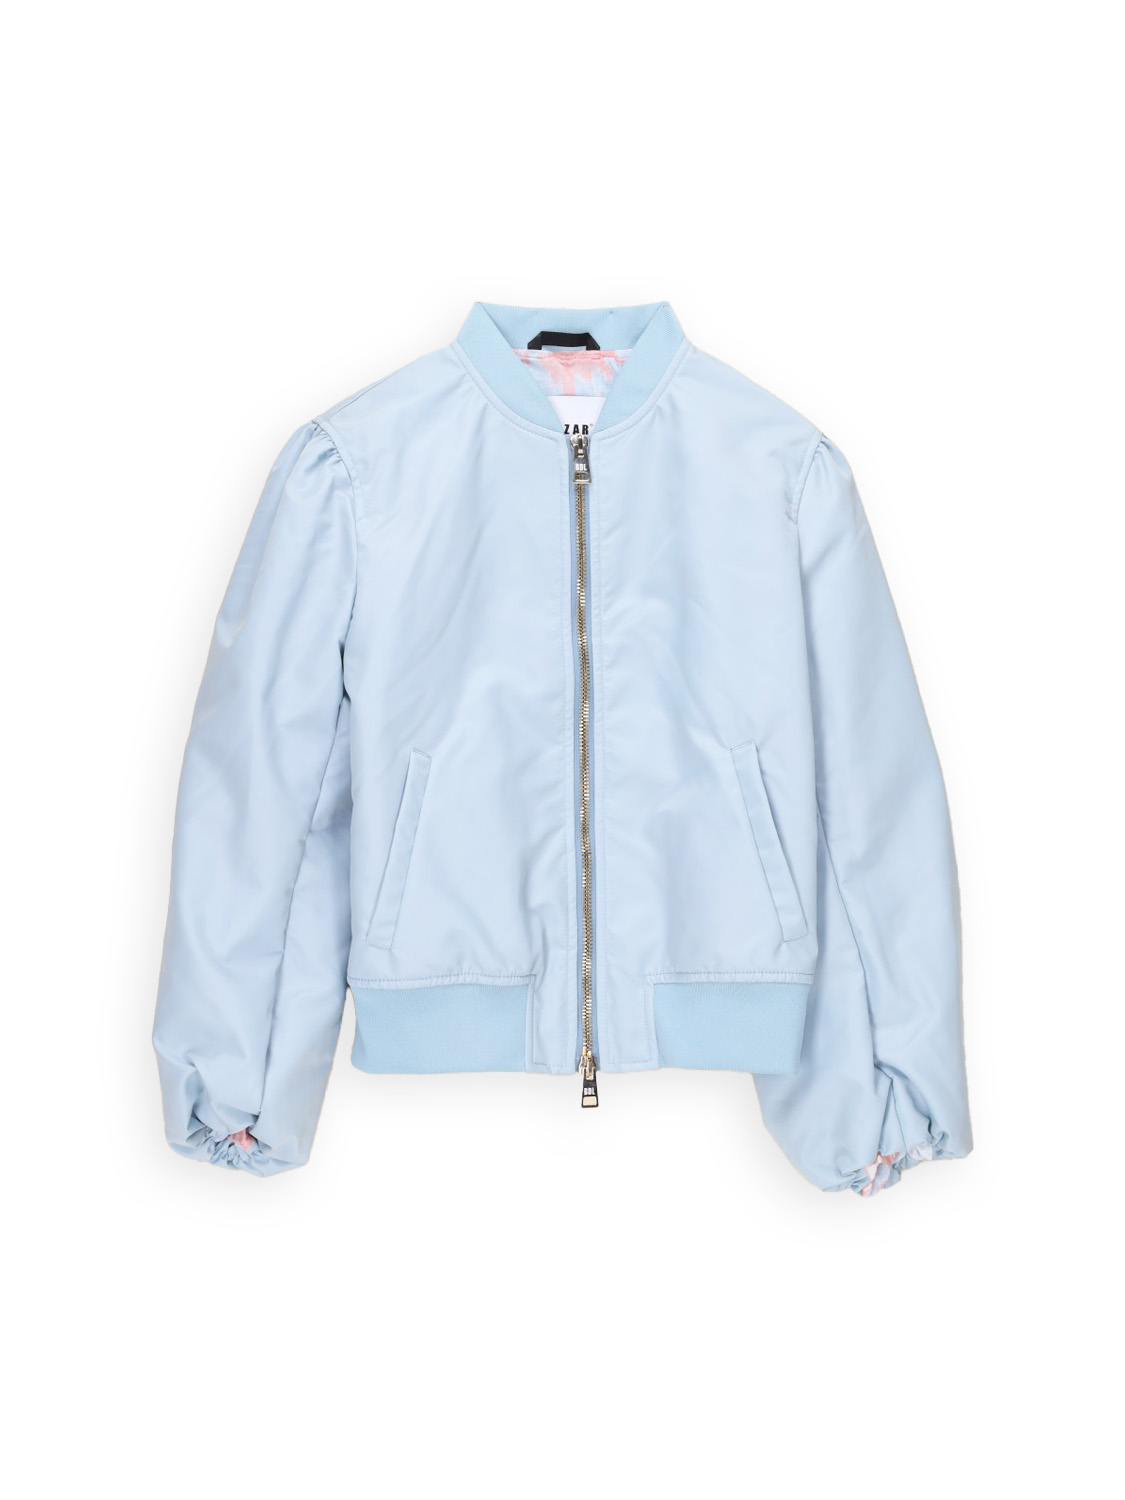 Classic bomber jacket made from tech fabric 